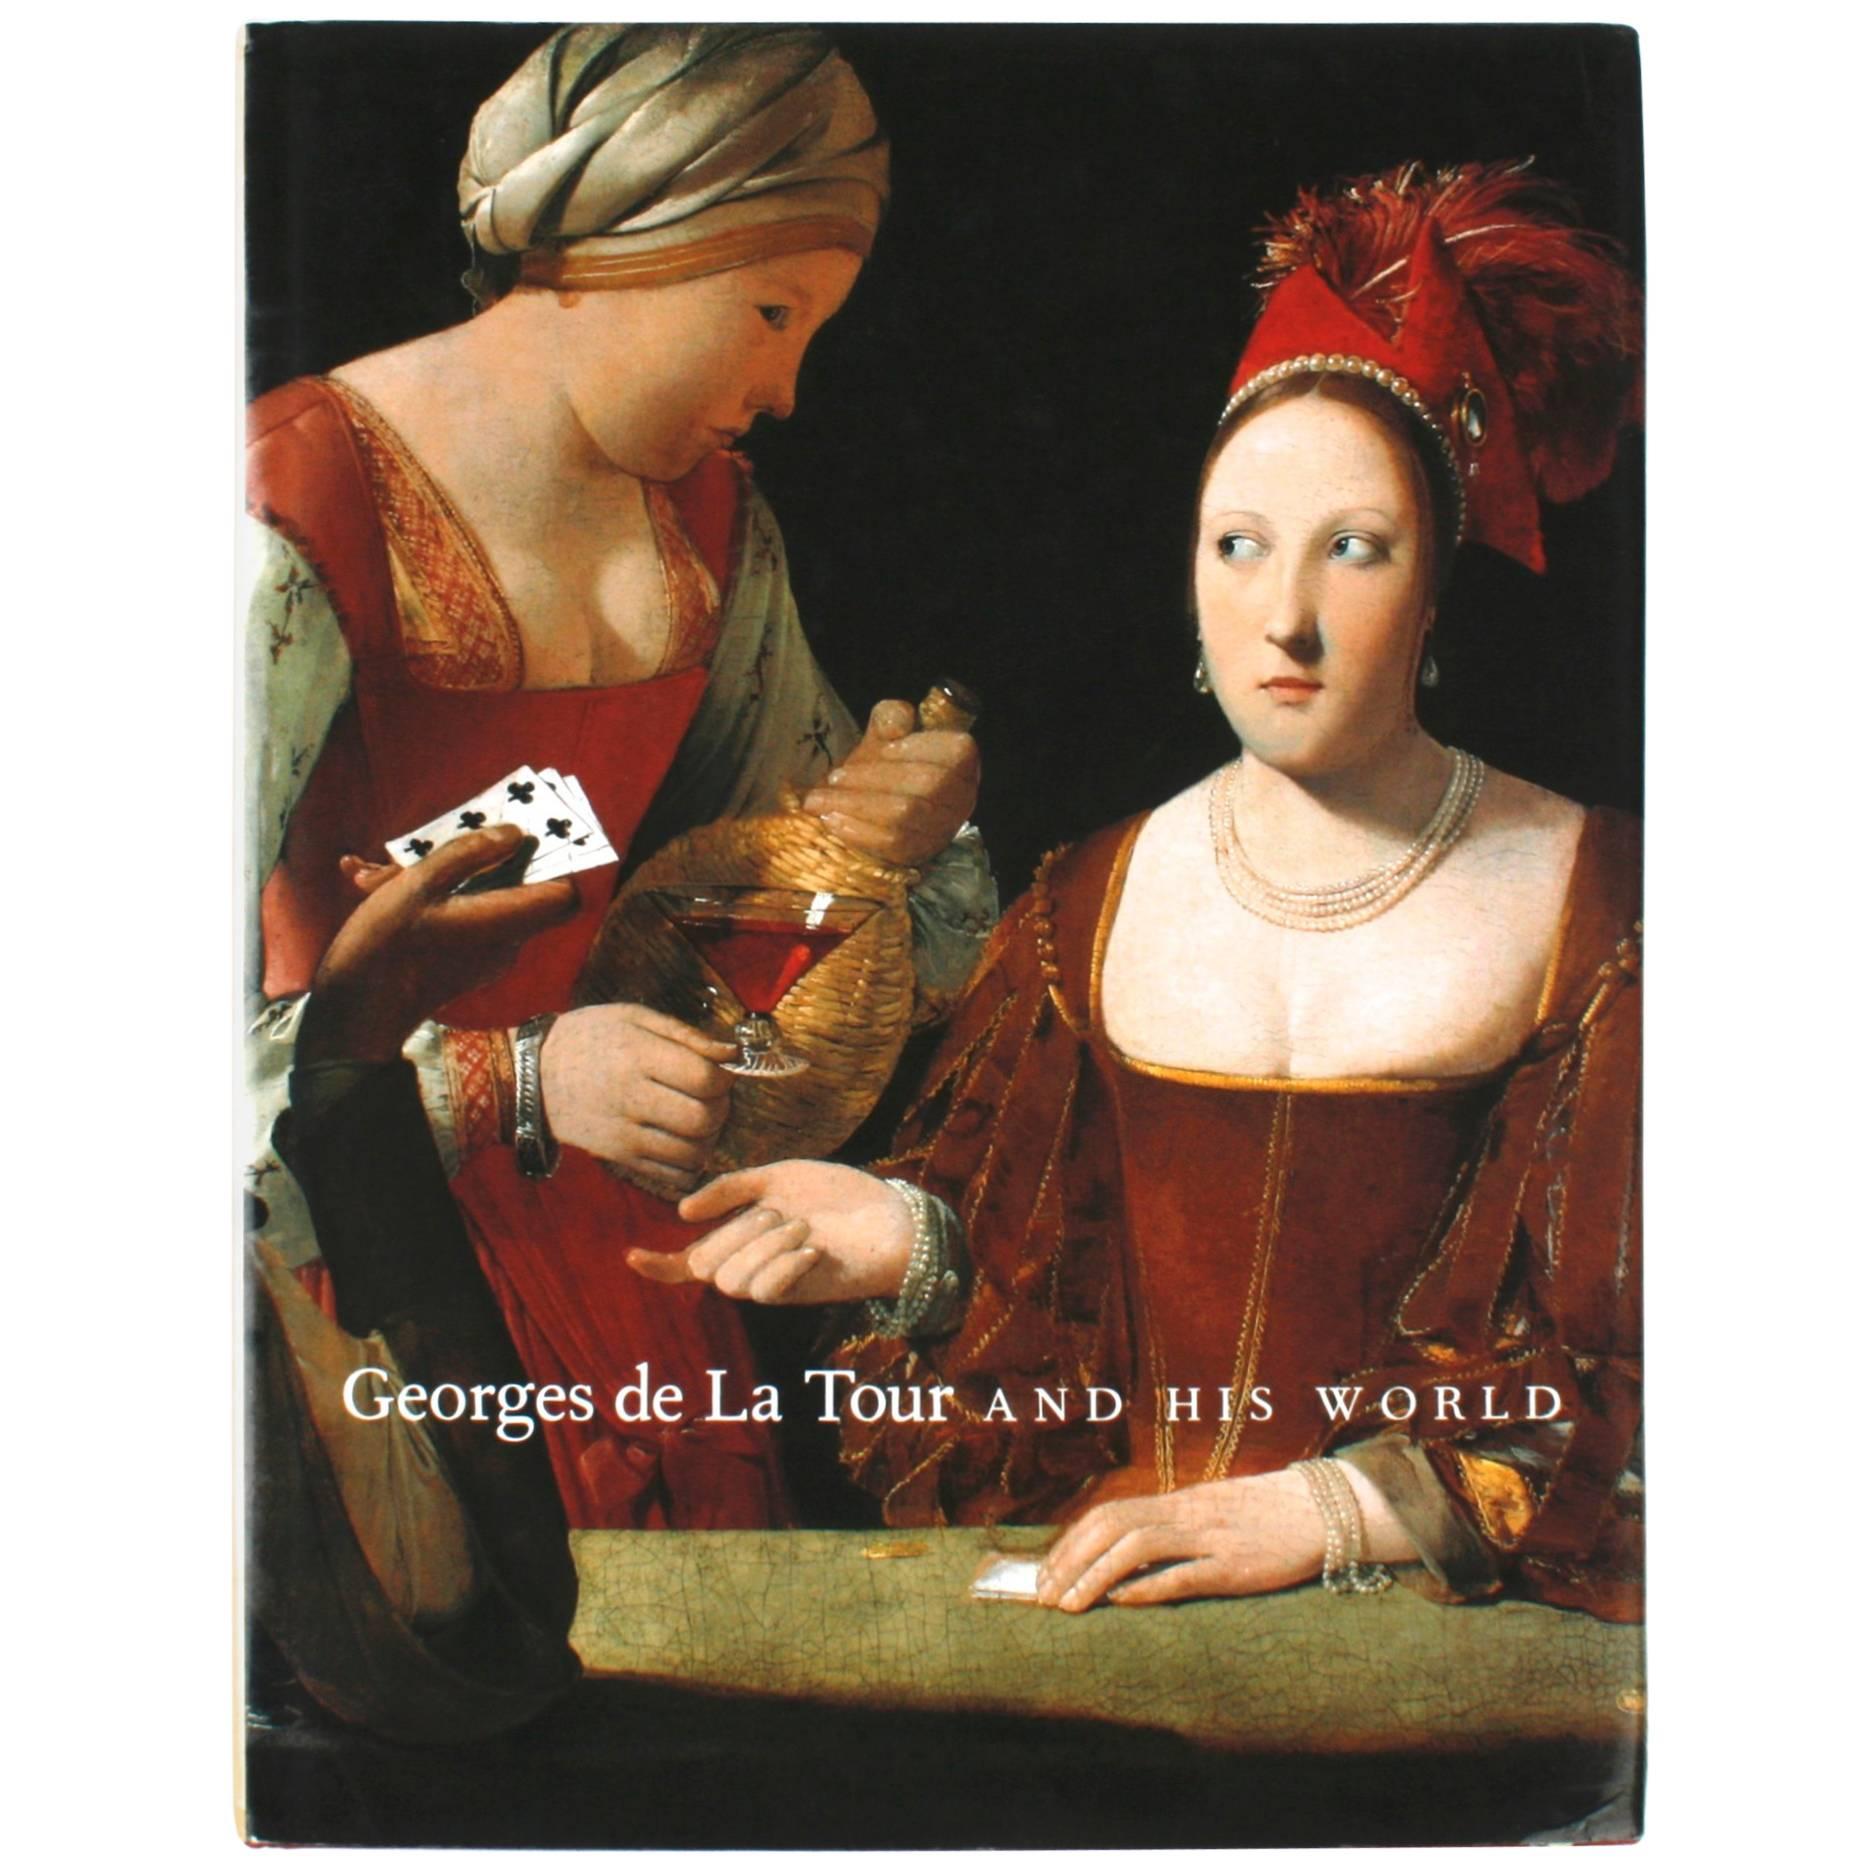 Georges de La Tour and His Works by Philip Conisbee, First Edition